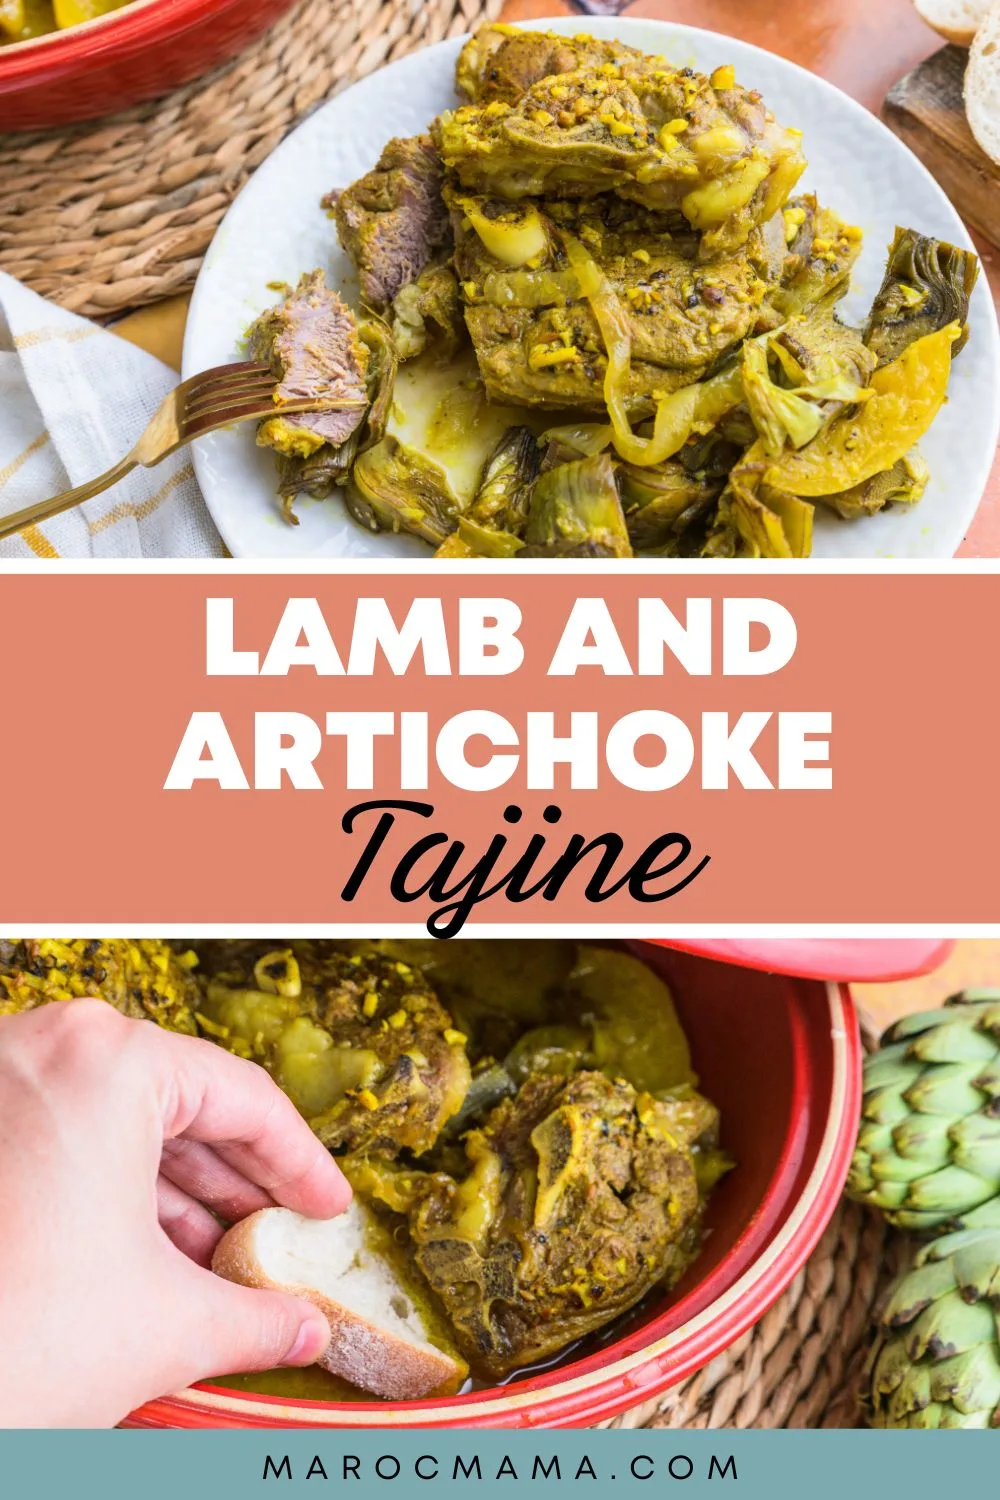 Top image, Lamb and Artichoke dish served on a white plate; bottom image, the same dish with bread with the text Lamb and Artichoke Tajine